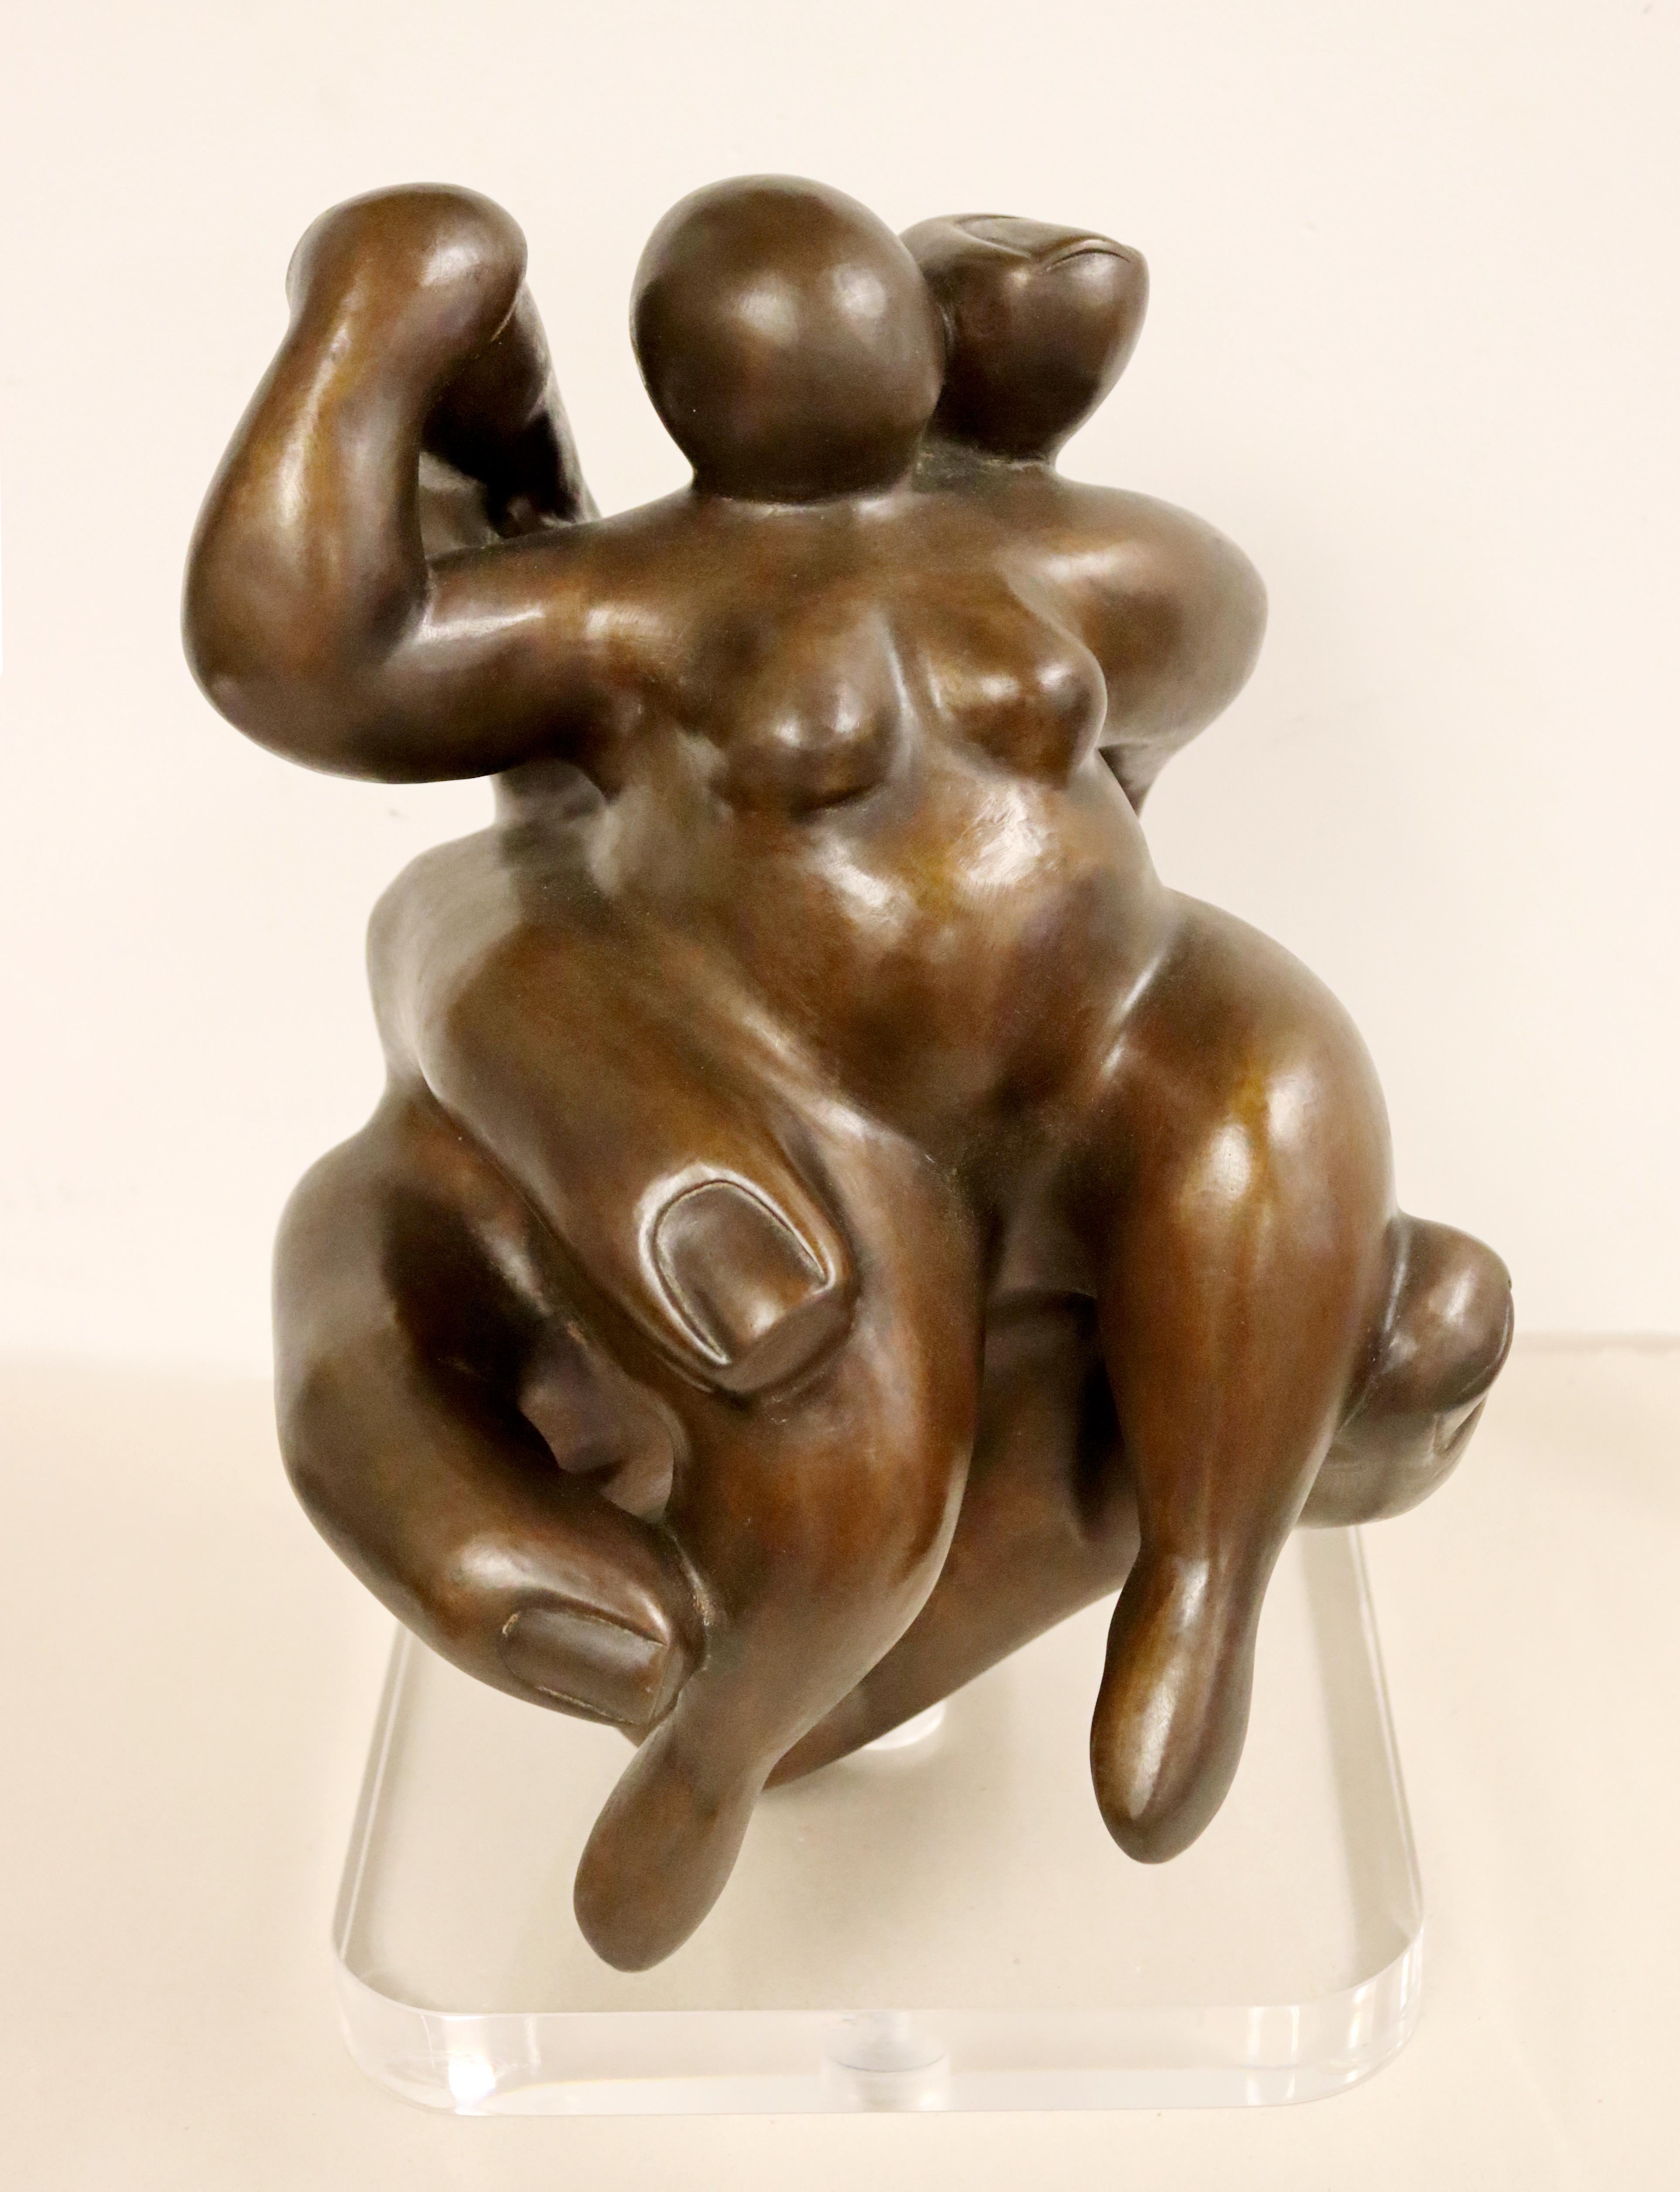 For your consideration is an astonishing, bronze table sculpture, of a woman sitting in a hand, 